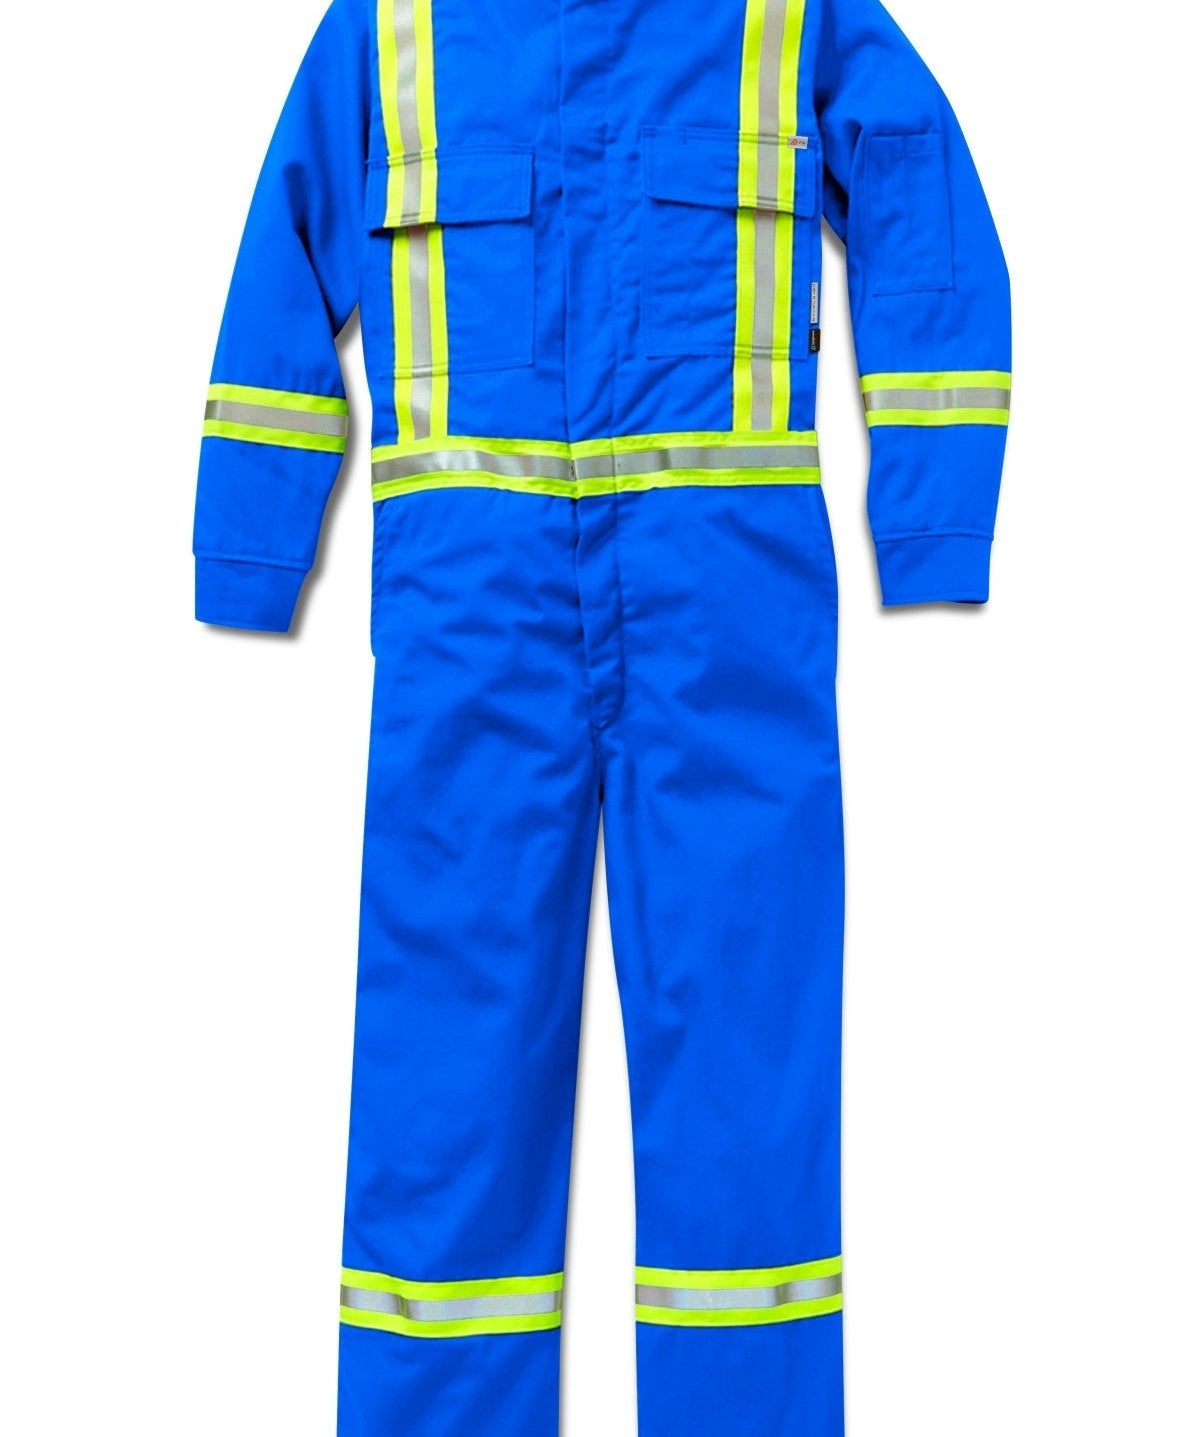 FR Contractor Coverall with CSA Trim - Royal Blue - Rasco FR